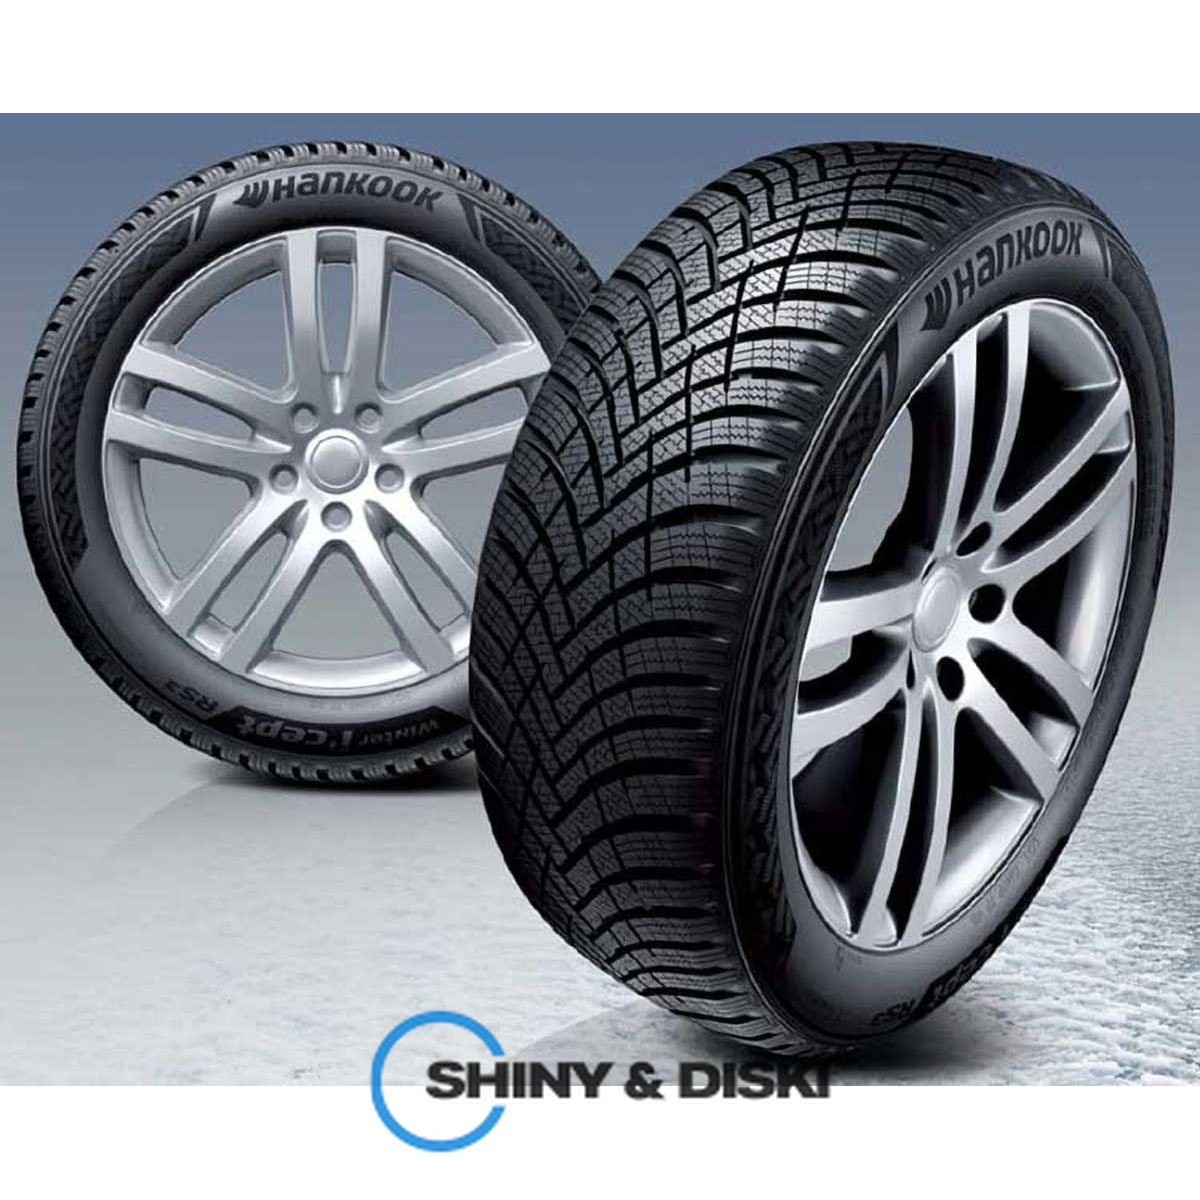 покрышки hankook winter i*cept rs3 w462 195/60 r16 93h